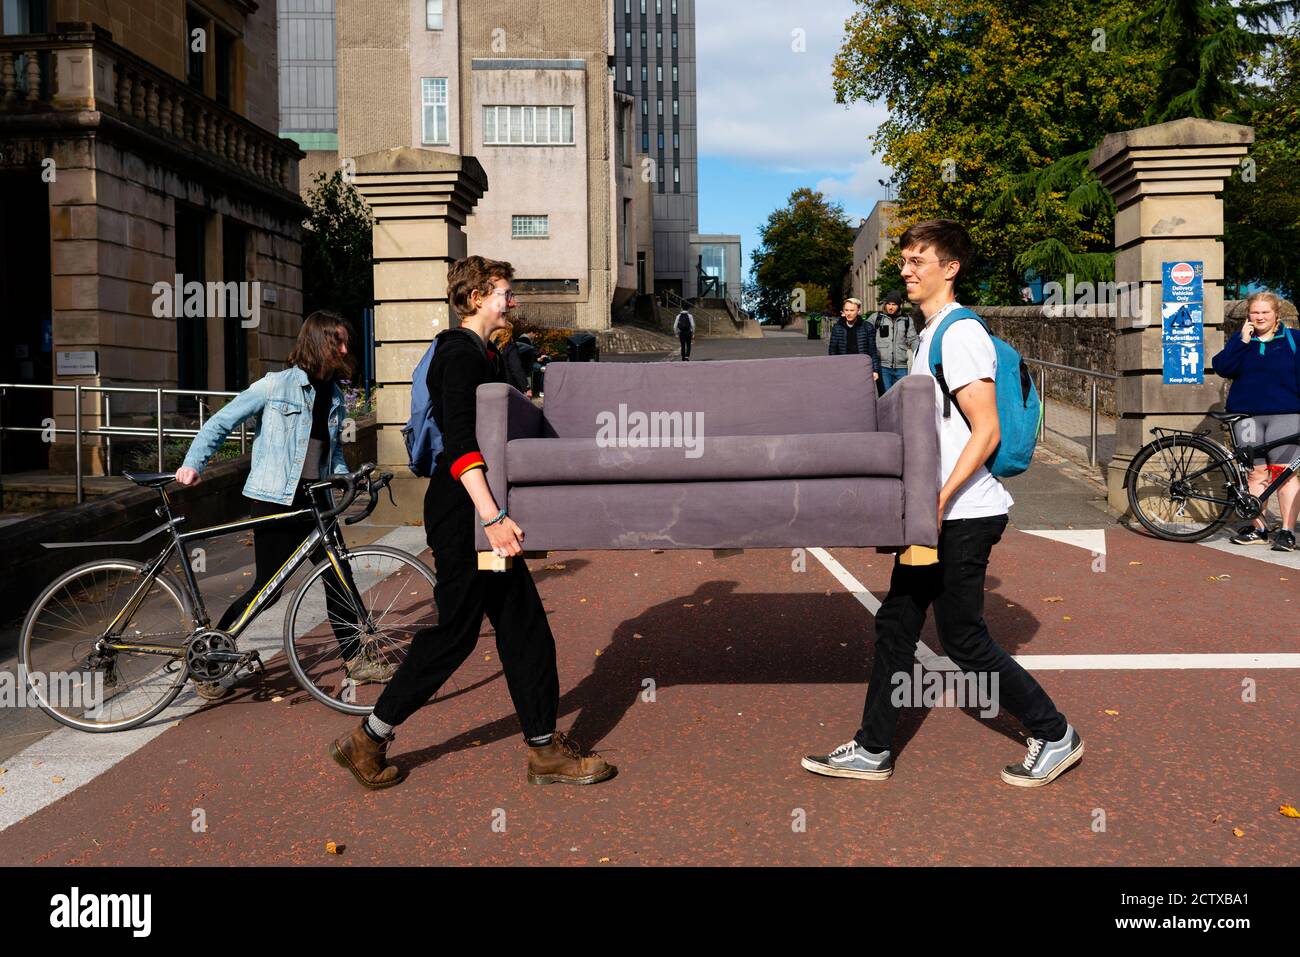 Glasgow, Scotland, UK. 25 September, 2020. Many students at Glasgow University have tested positive for the Covid-19 virus. The Scottish Government has controversially ordered students in several halls of residence where positive cases have spiked, to self-isolate indefinitely. Pictured;  Fresher students transporting a sofa bought on Gumtree. Iain Masterton/Alamy Live News Stock Photo